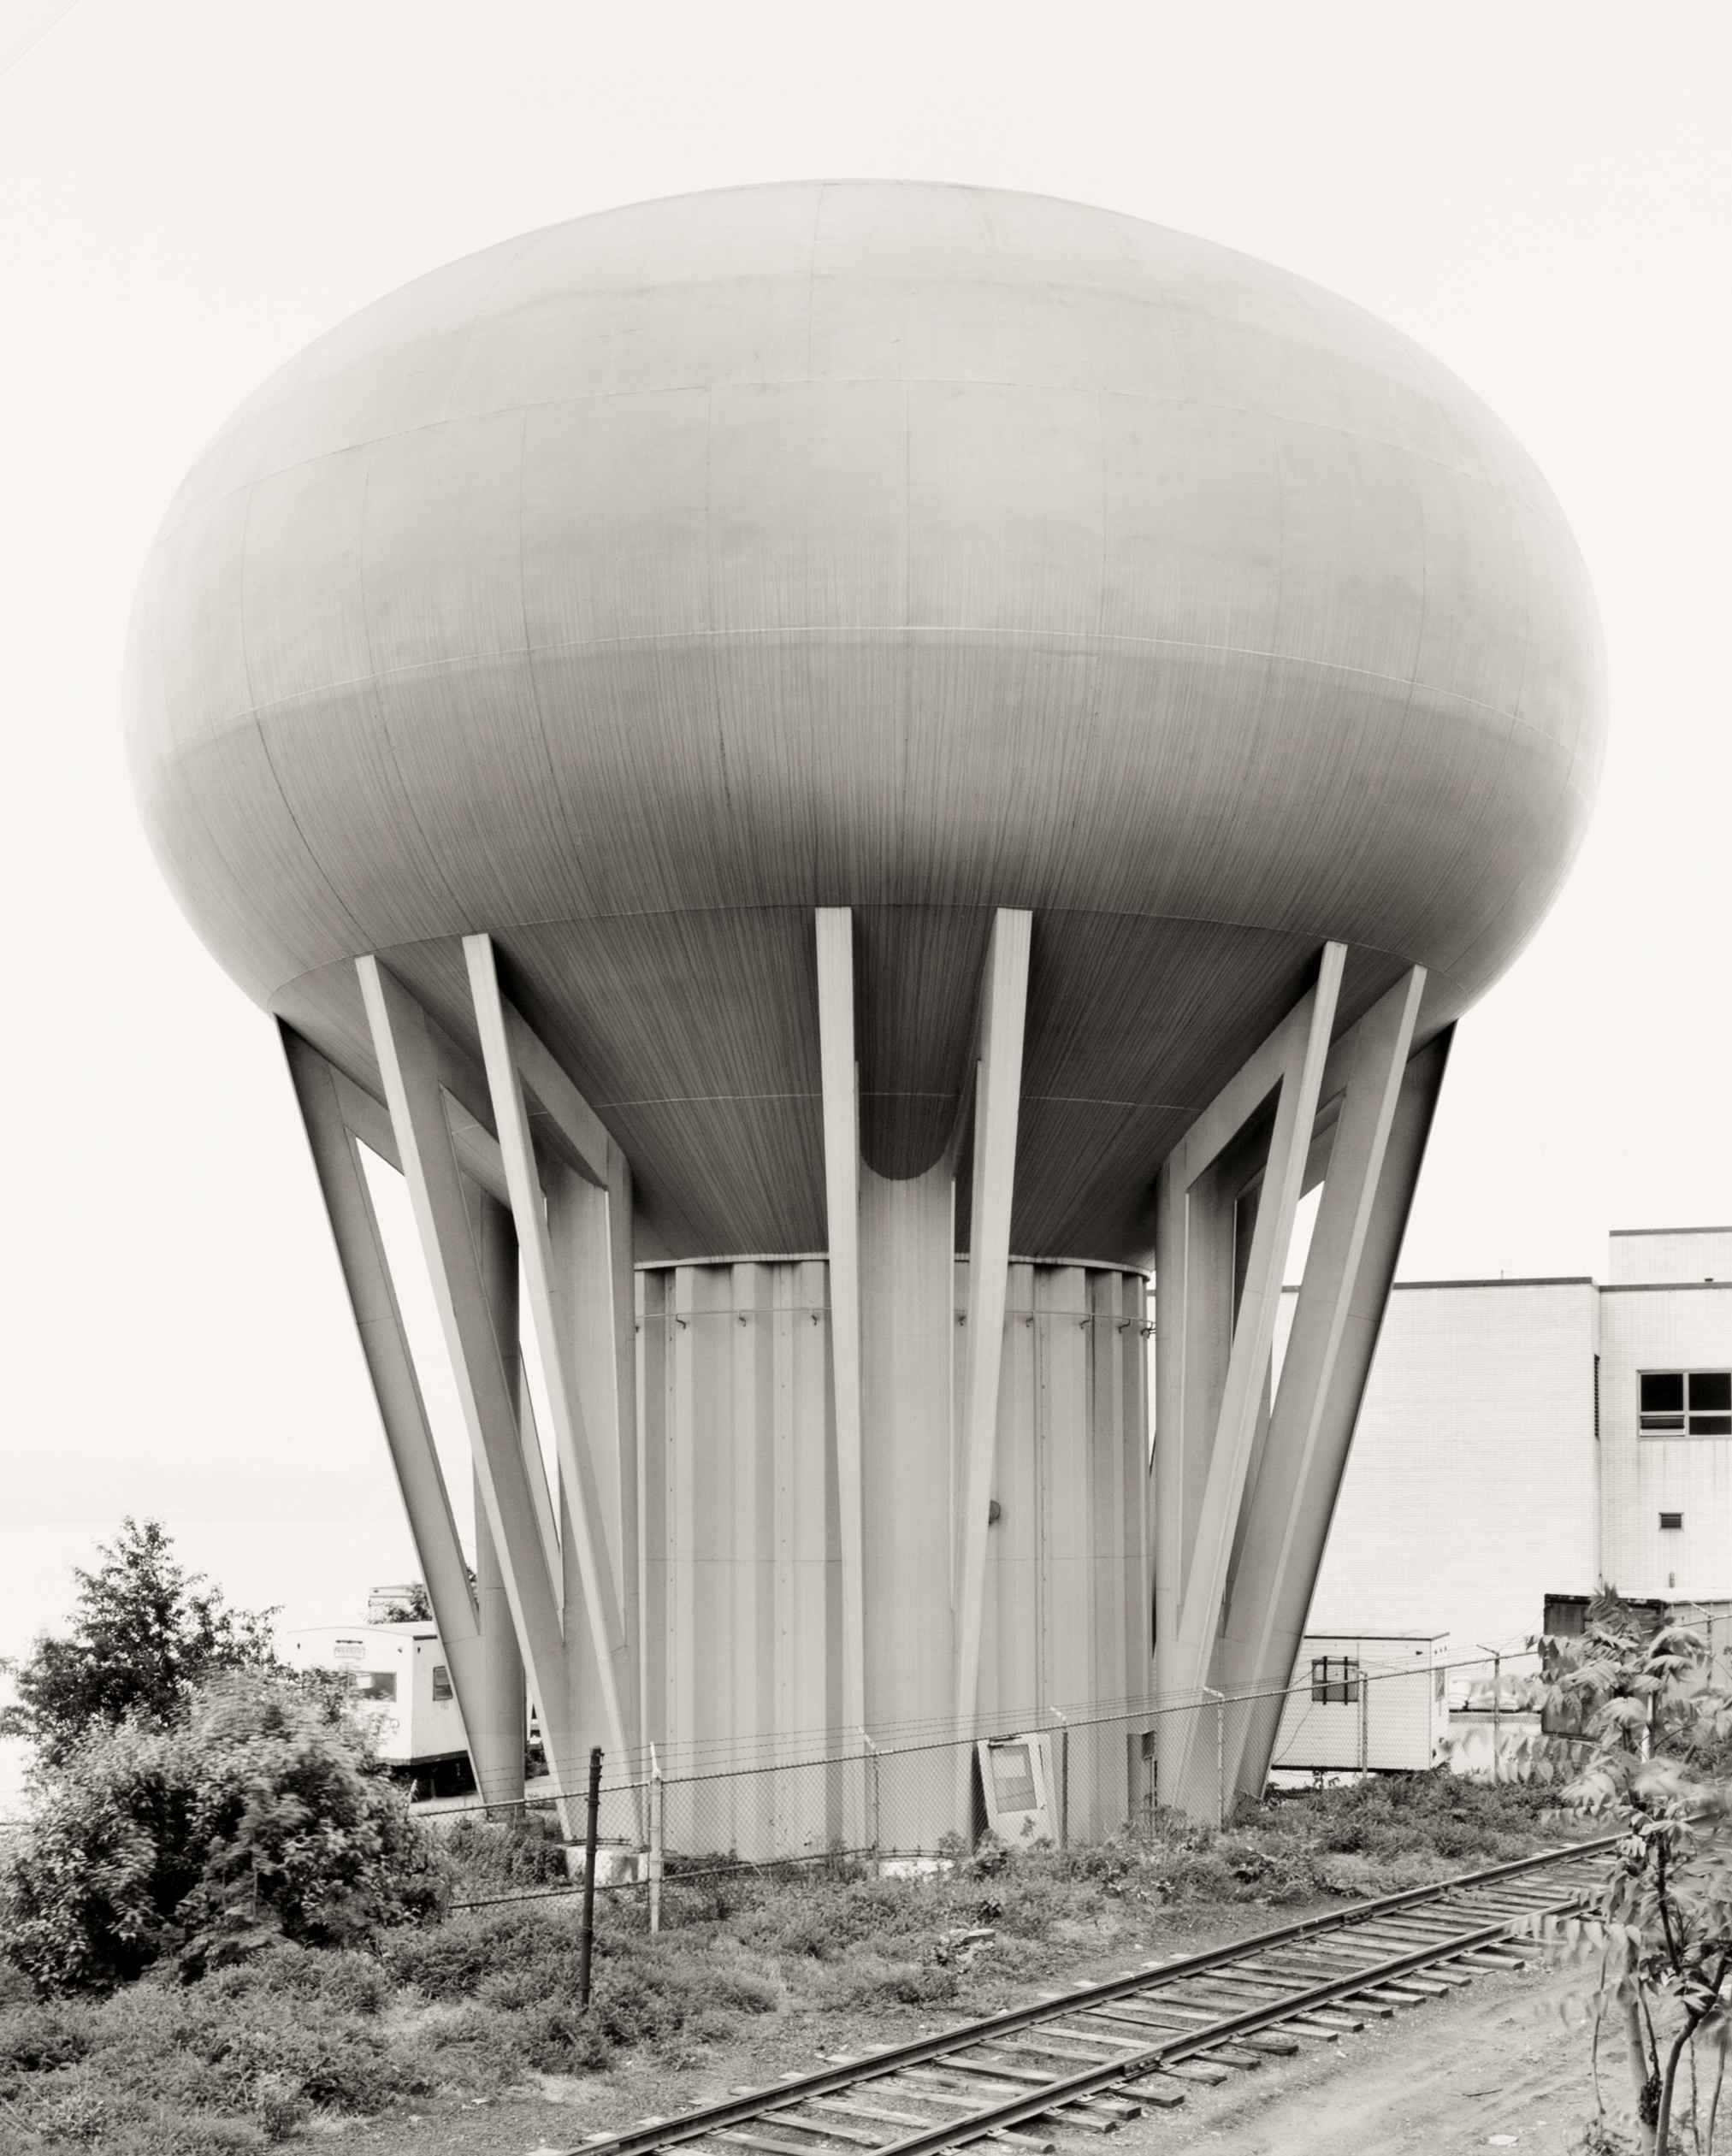 Black and white photograph of a circular water tower near railroad tracks